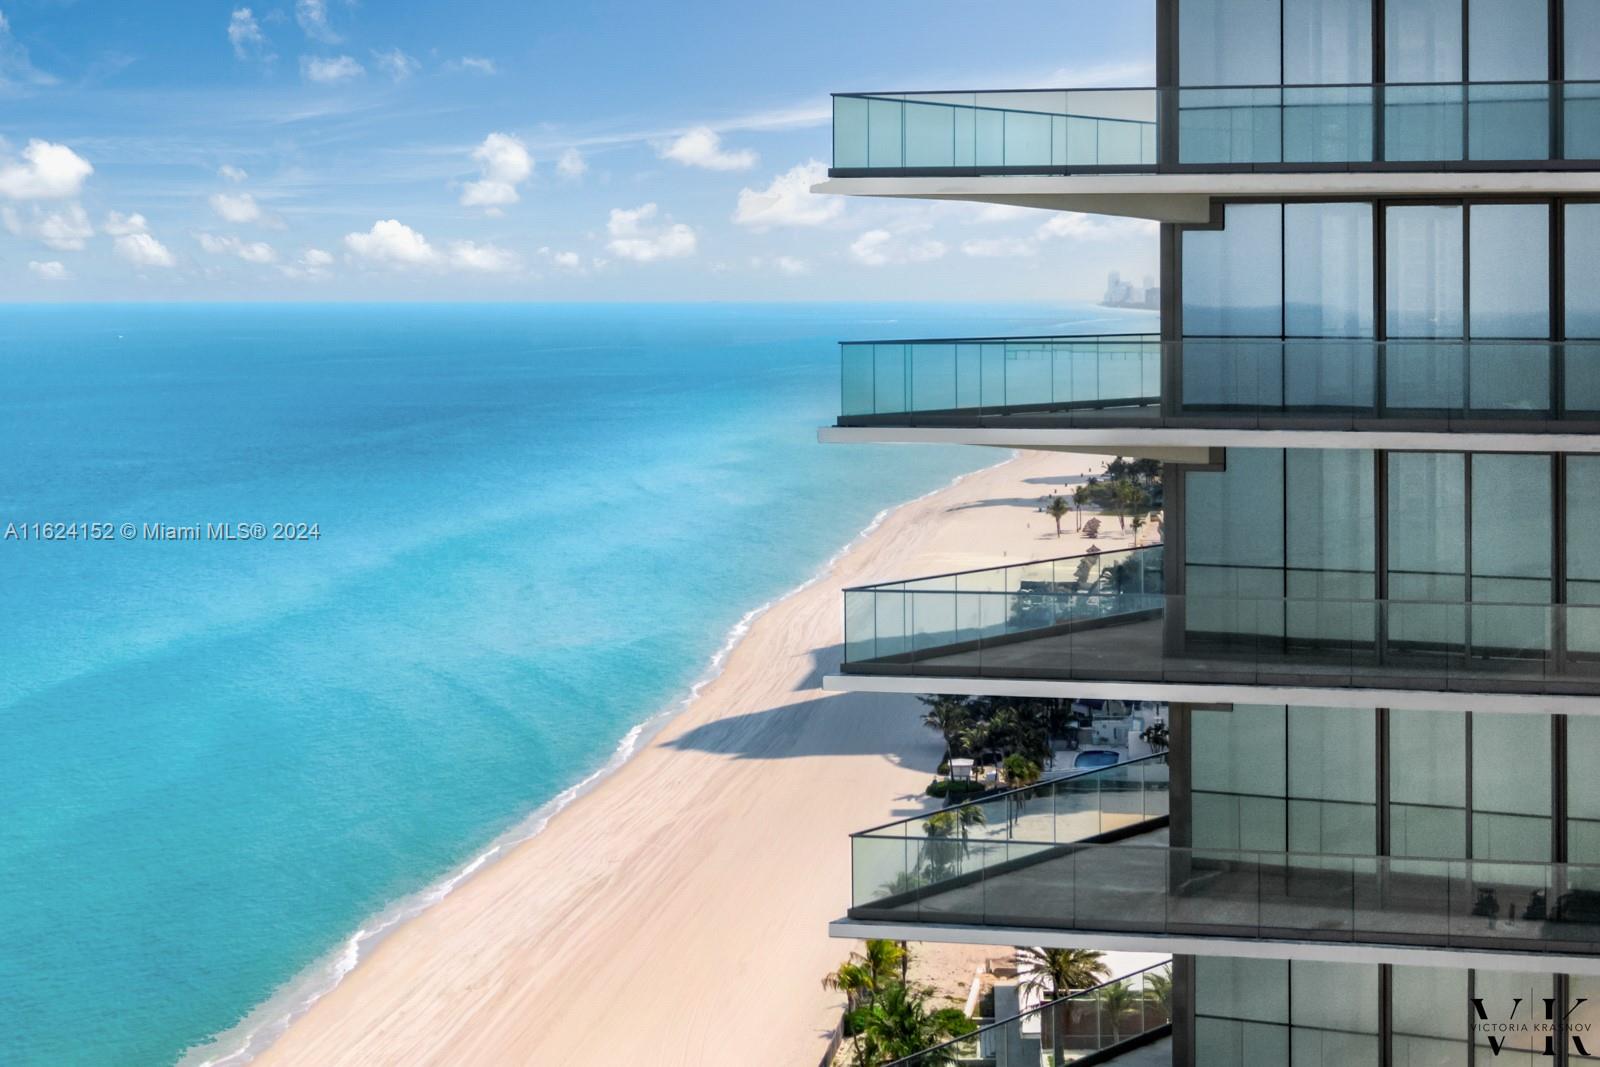 Gorgeous designer decorated turn-key 4bedroom plus a Den, 5 1/2 bathrooms, 2 oversized balconies with breathtaking views of the ocean and intercoastal! A must see unit with Armani, Fendi, Hermes and other designer finishes! Build-ins throughout the unit to create storage space and paneling! The building offers a spa, fitness center, movie theater, hair and nail salon, cigar room, Wine room, game room and an Armani restaurant. Indulge in the lifestyle of opulence and sophistication at Armani Casa, where every detail is designed to offer the ultimate in luxury living on the ocean in Sunny Isles Beach!